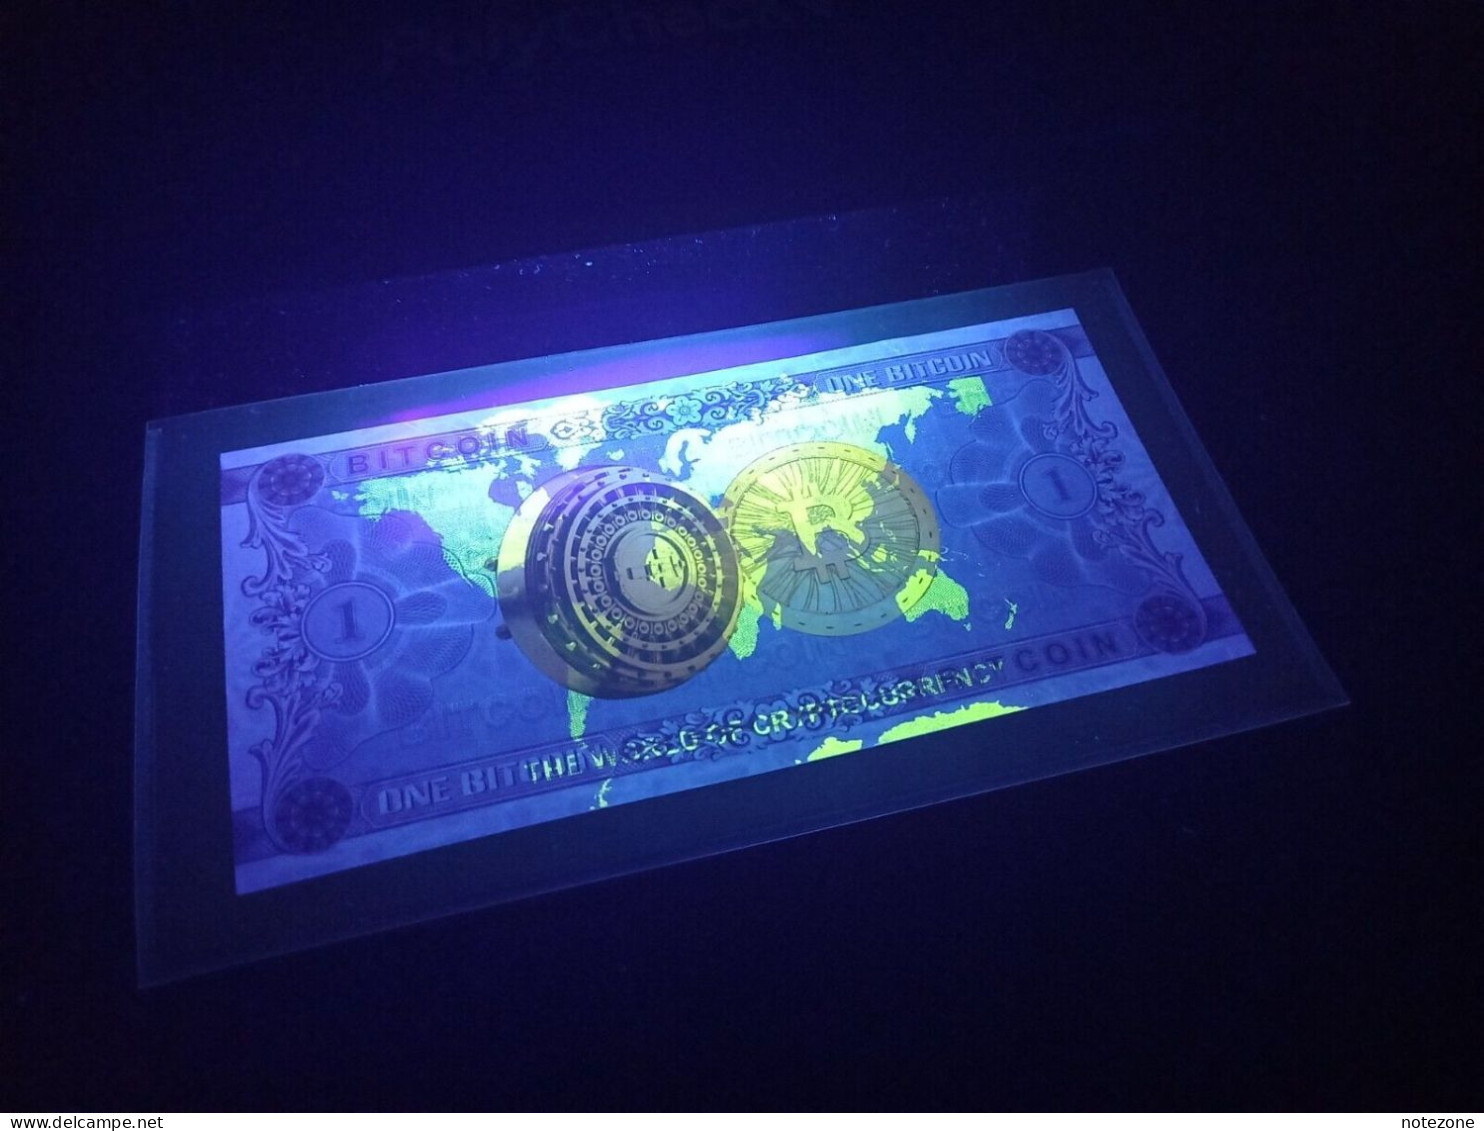 BTC Bitcoin Cryptocurrency Crypto Paper Fantasy Private Note Banknote - Collections & Lots